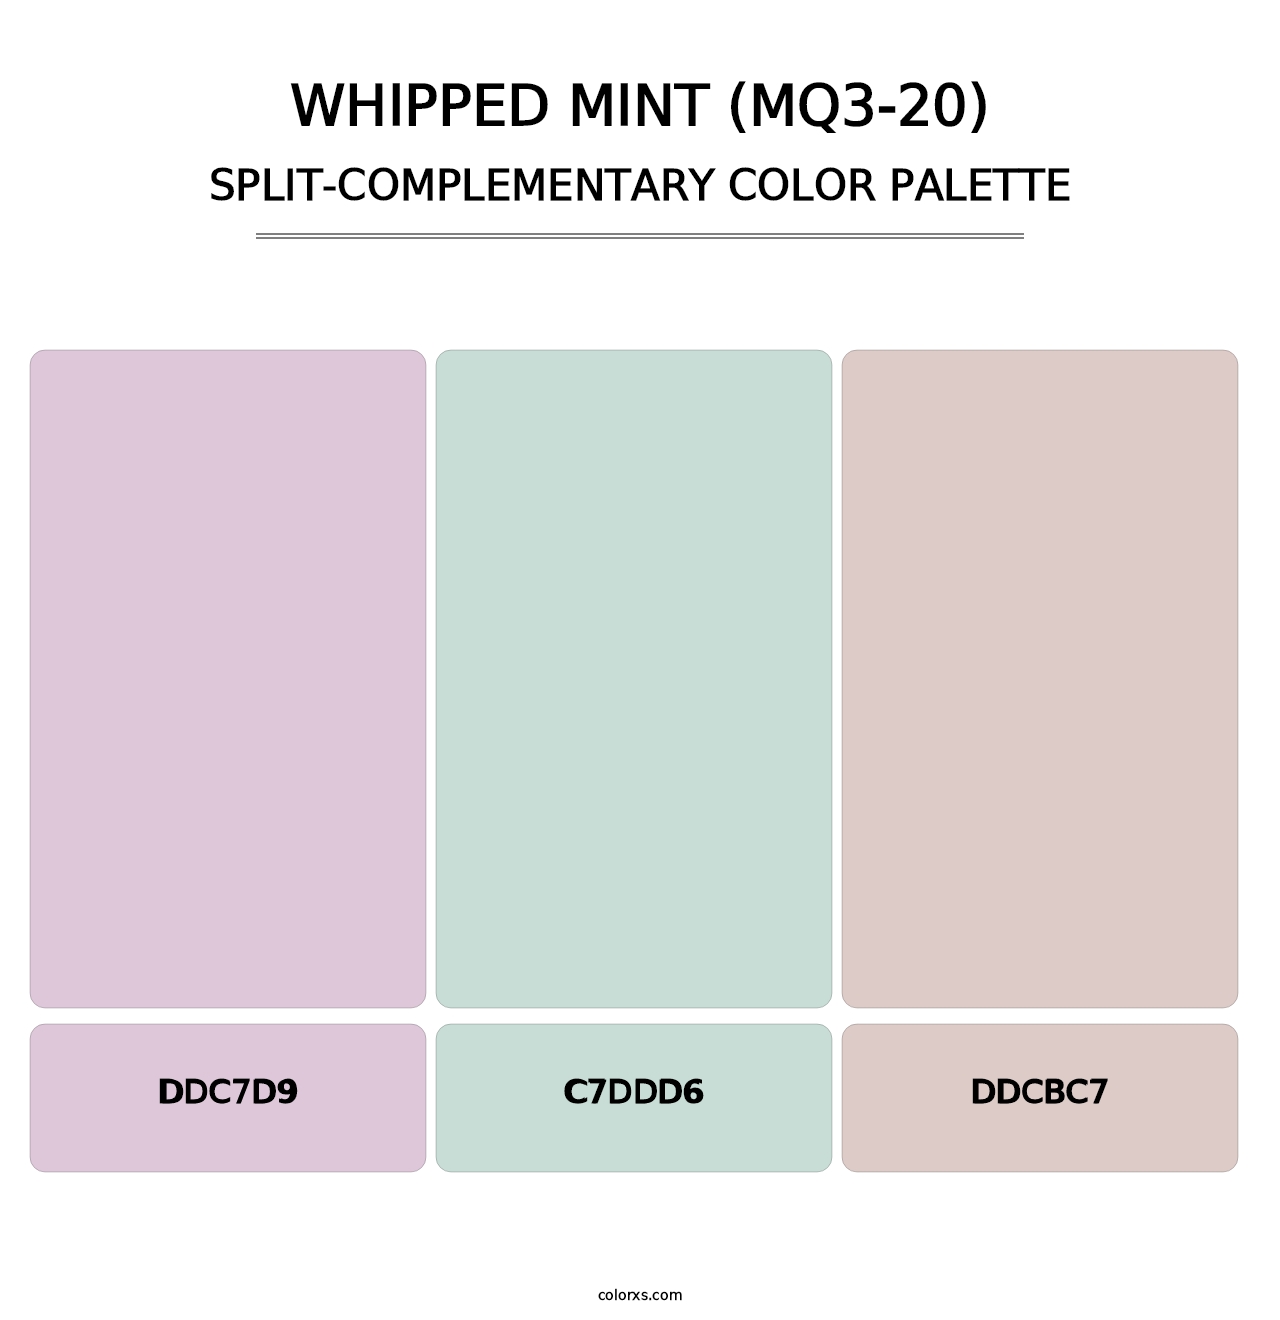 Whipped Mint (MQ3-20) - Split-Complementary Color Palette